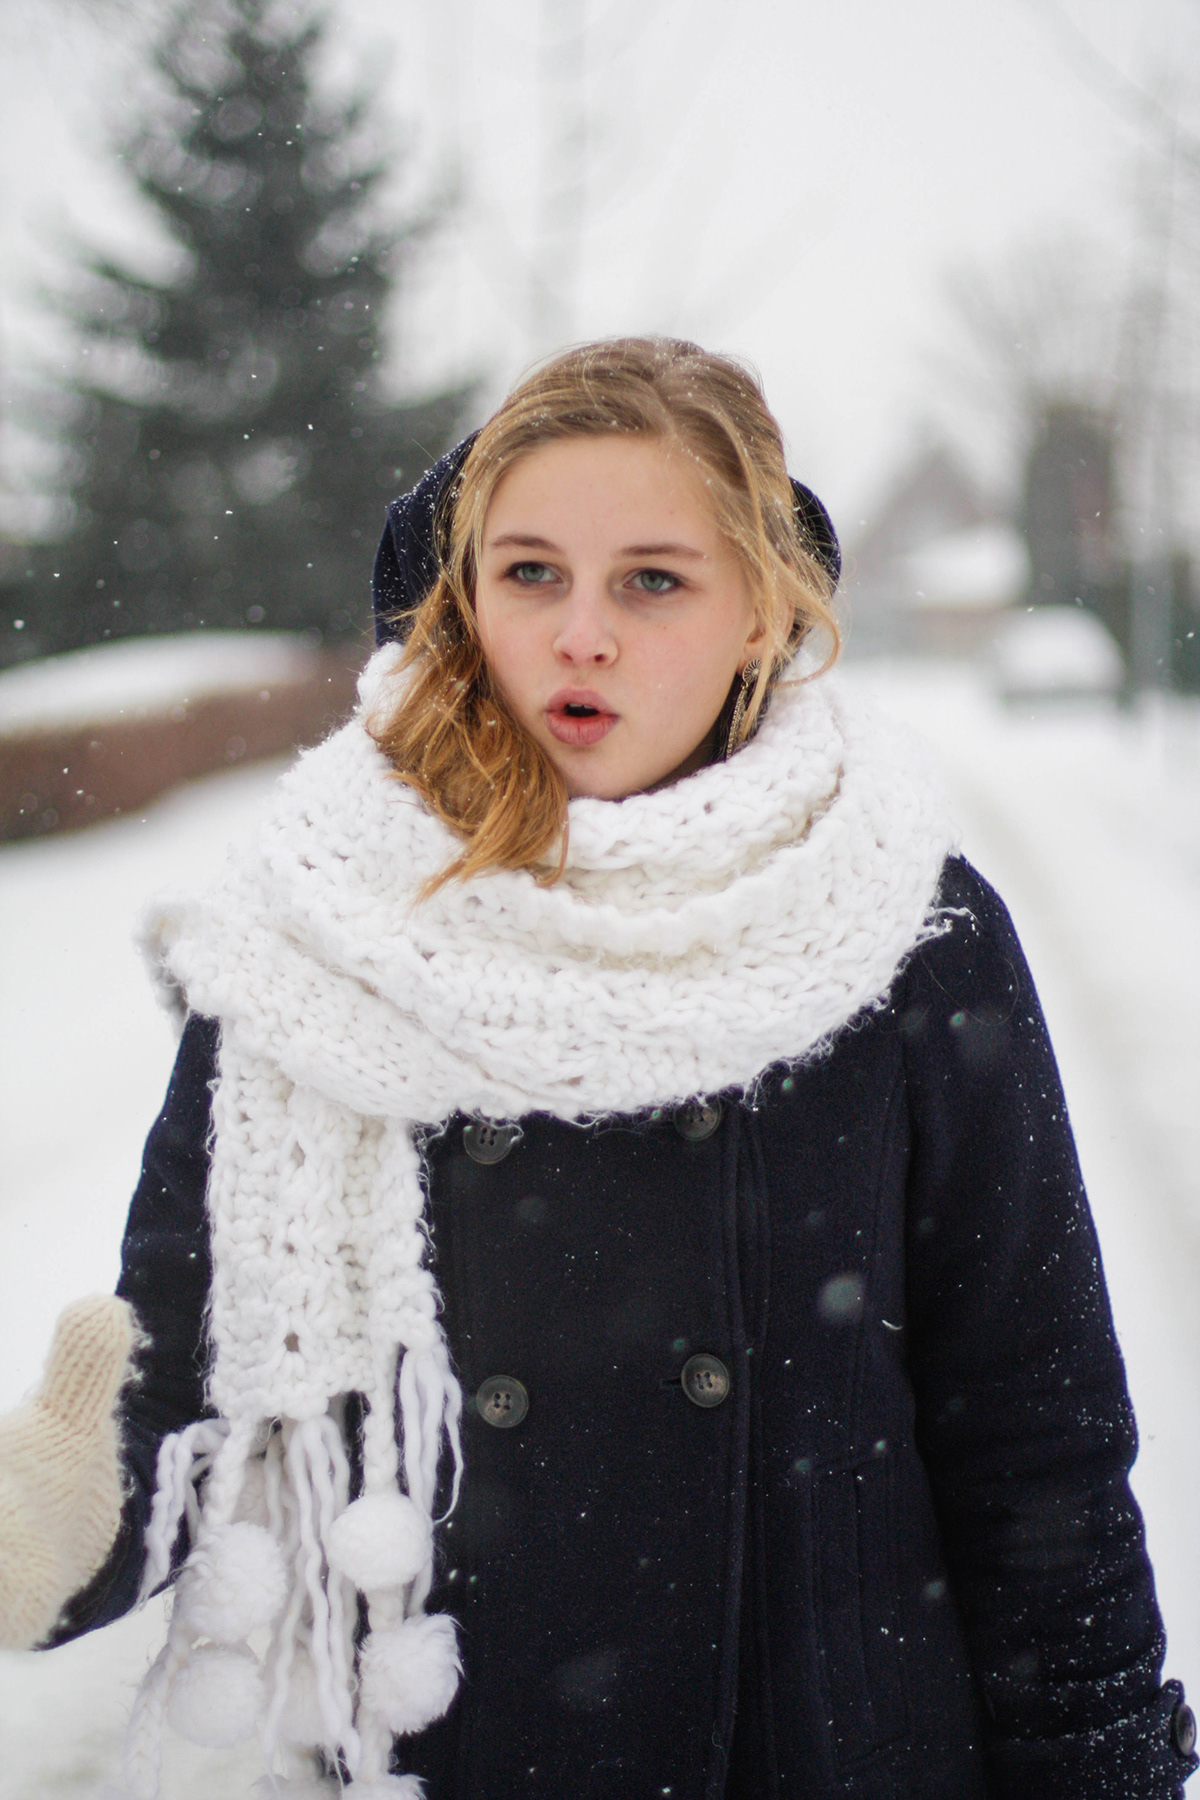 snow snowfun cold  WINTER  sisters  sleight blonde  ginger  January  portrait  people   girls  women